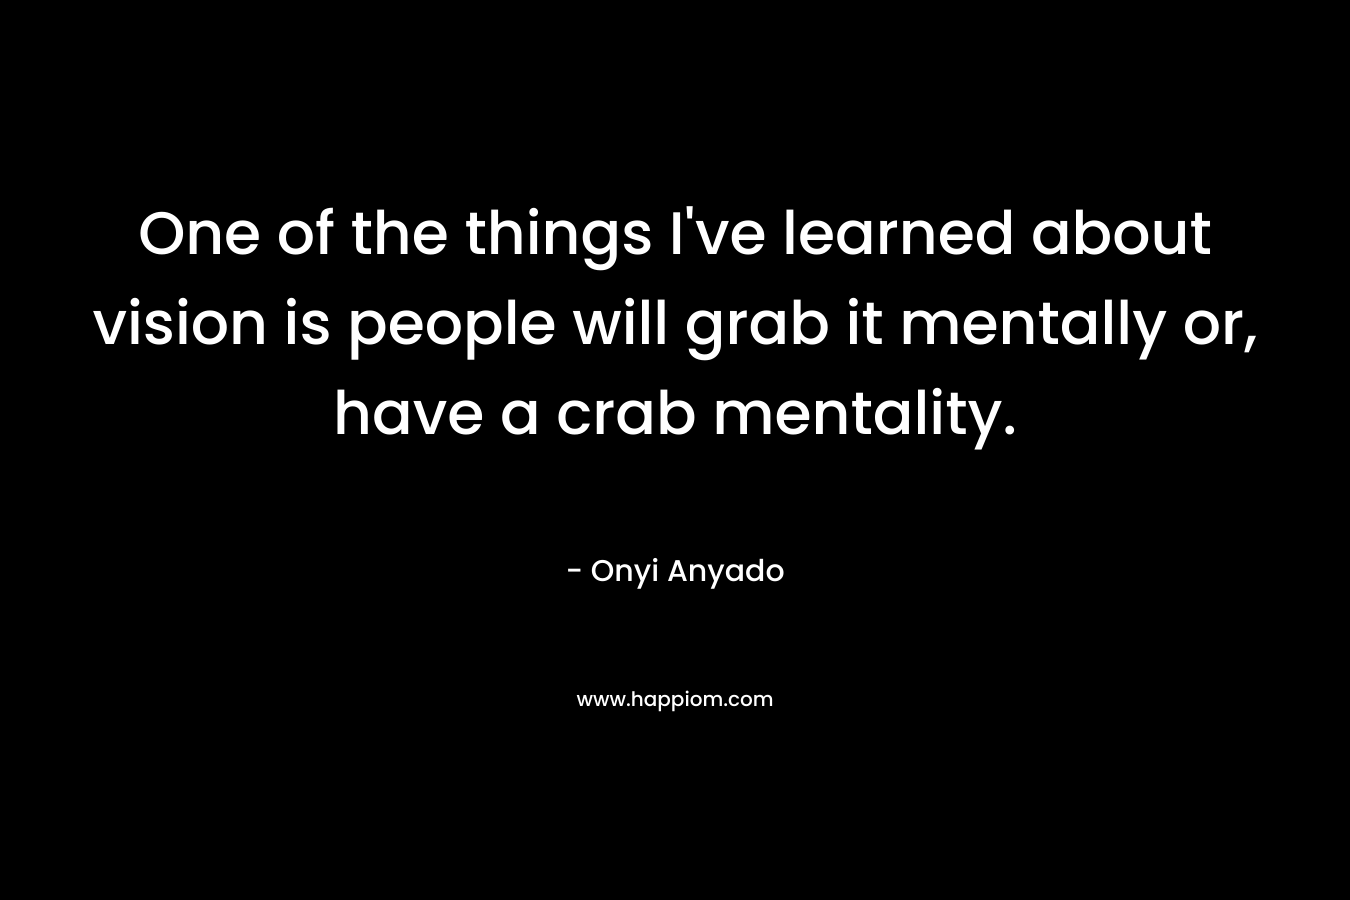 One of the things I’ve learned about vision is people will grab it mentally or, have a crab mentality. – Onyi Anyado